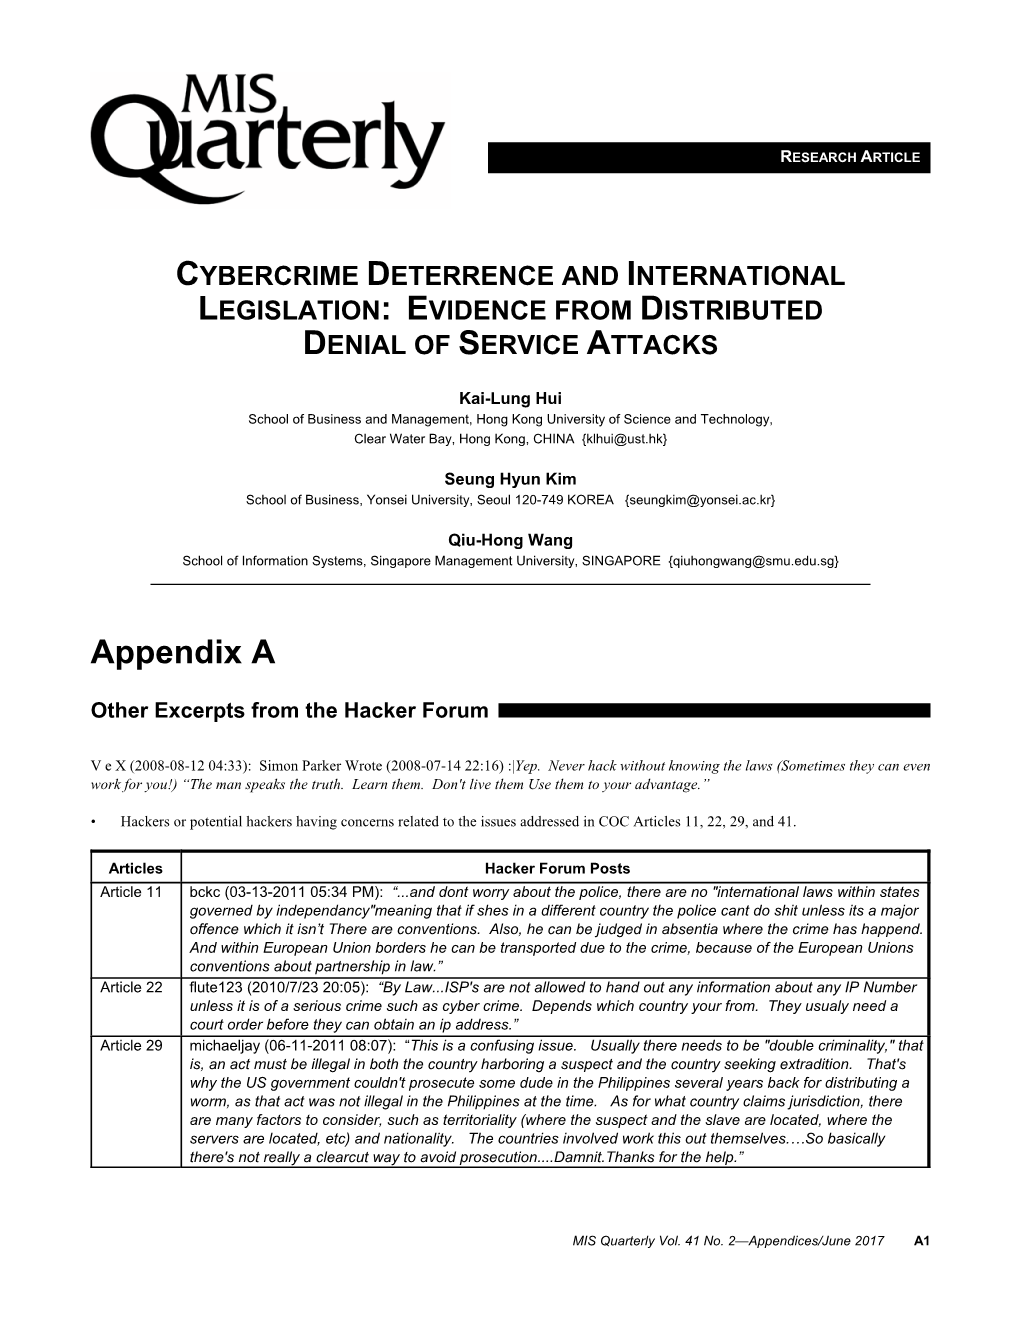 Cybercrime Deterrence and International Legislation: Evidence from Distributed Denial of Service Attacks